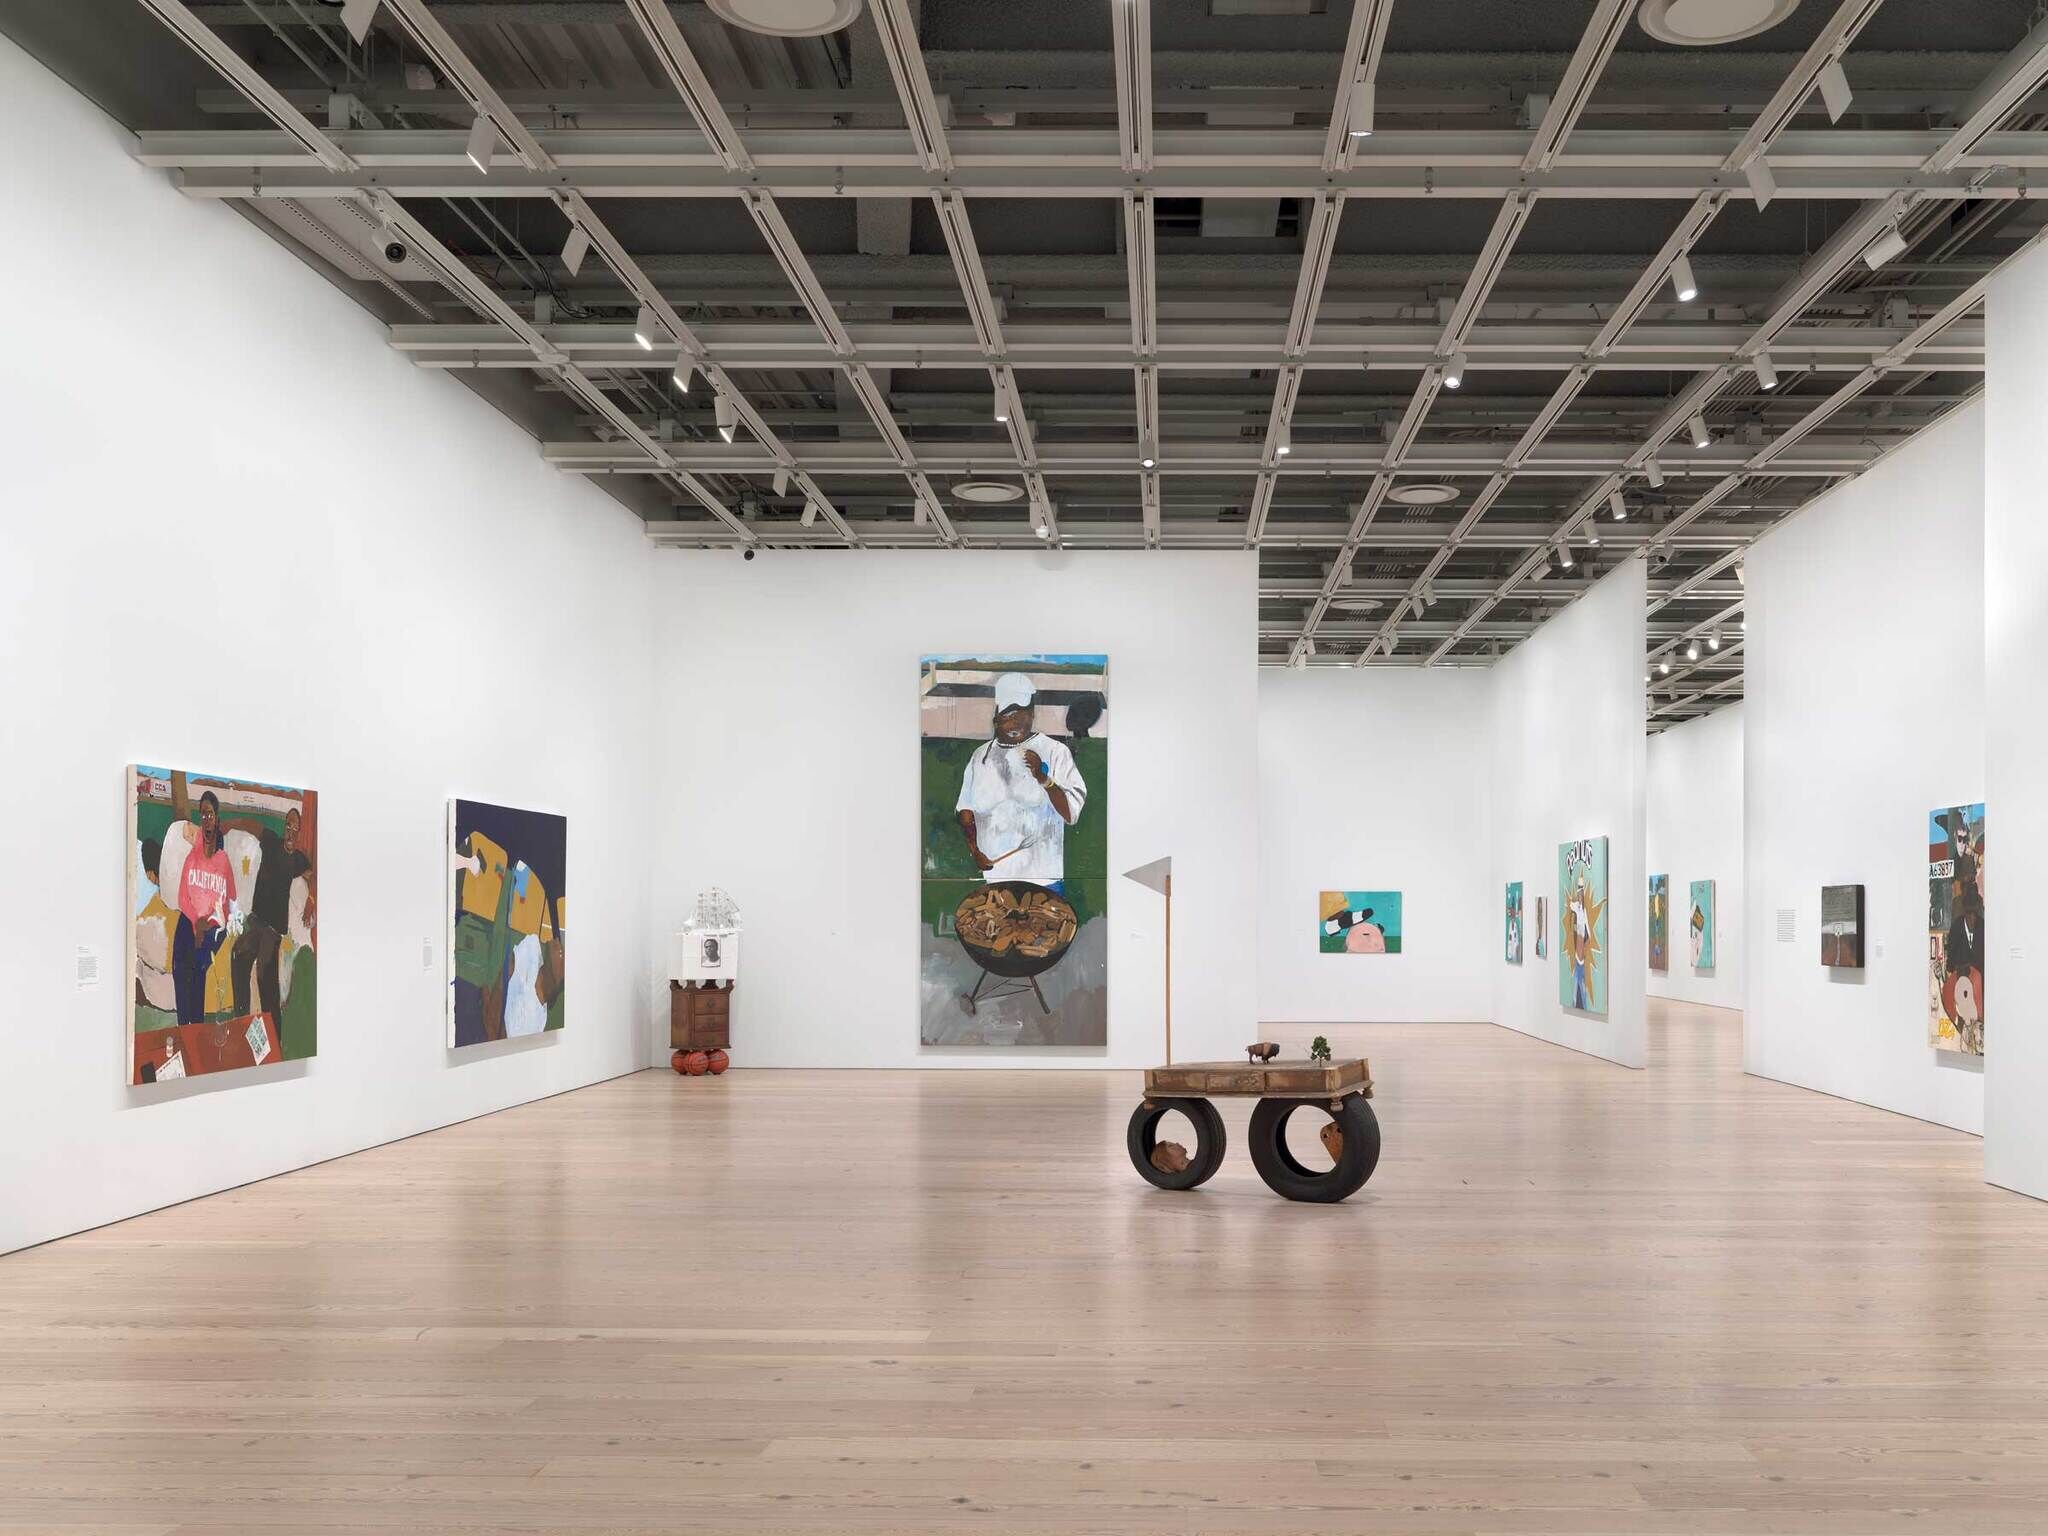 Multiple rooms with 11 paintings of portraits total, a sculpture of a cabinet on top of two basketballs in the left corner, and a sculpture of a bison on top of two tires with a white flag in the foreground.